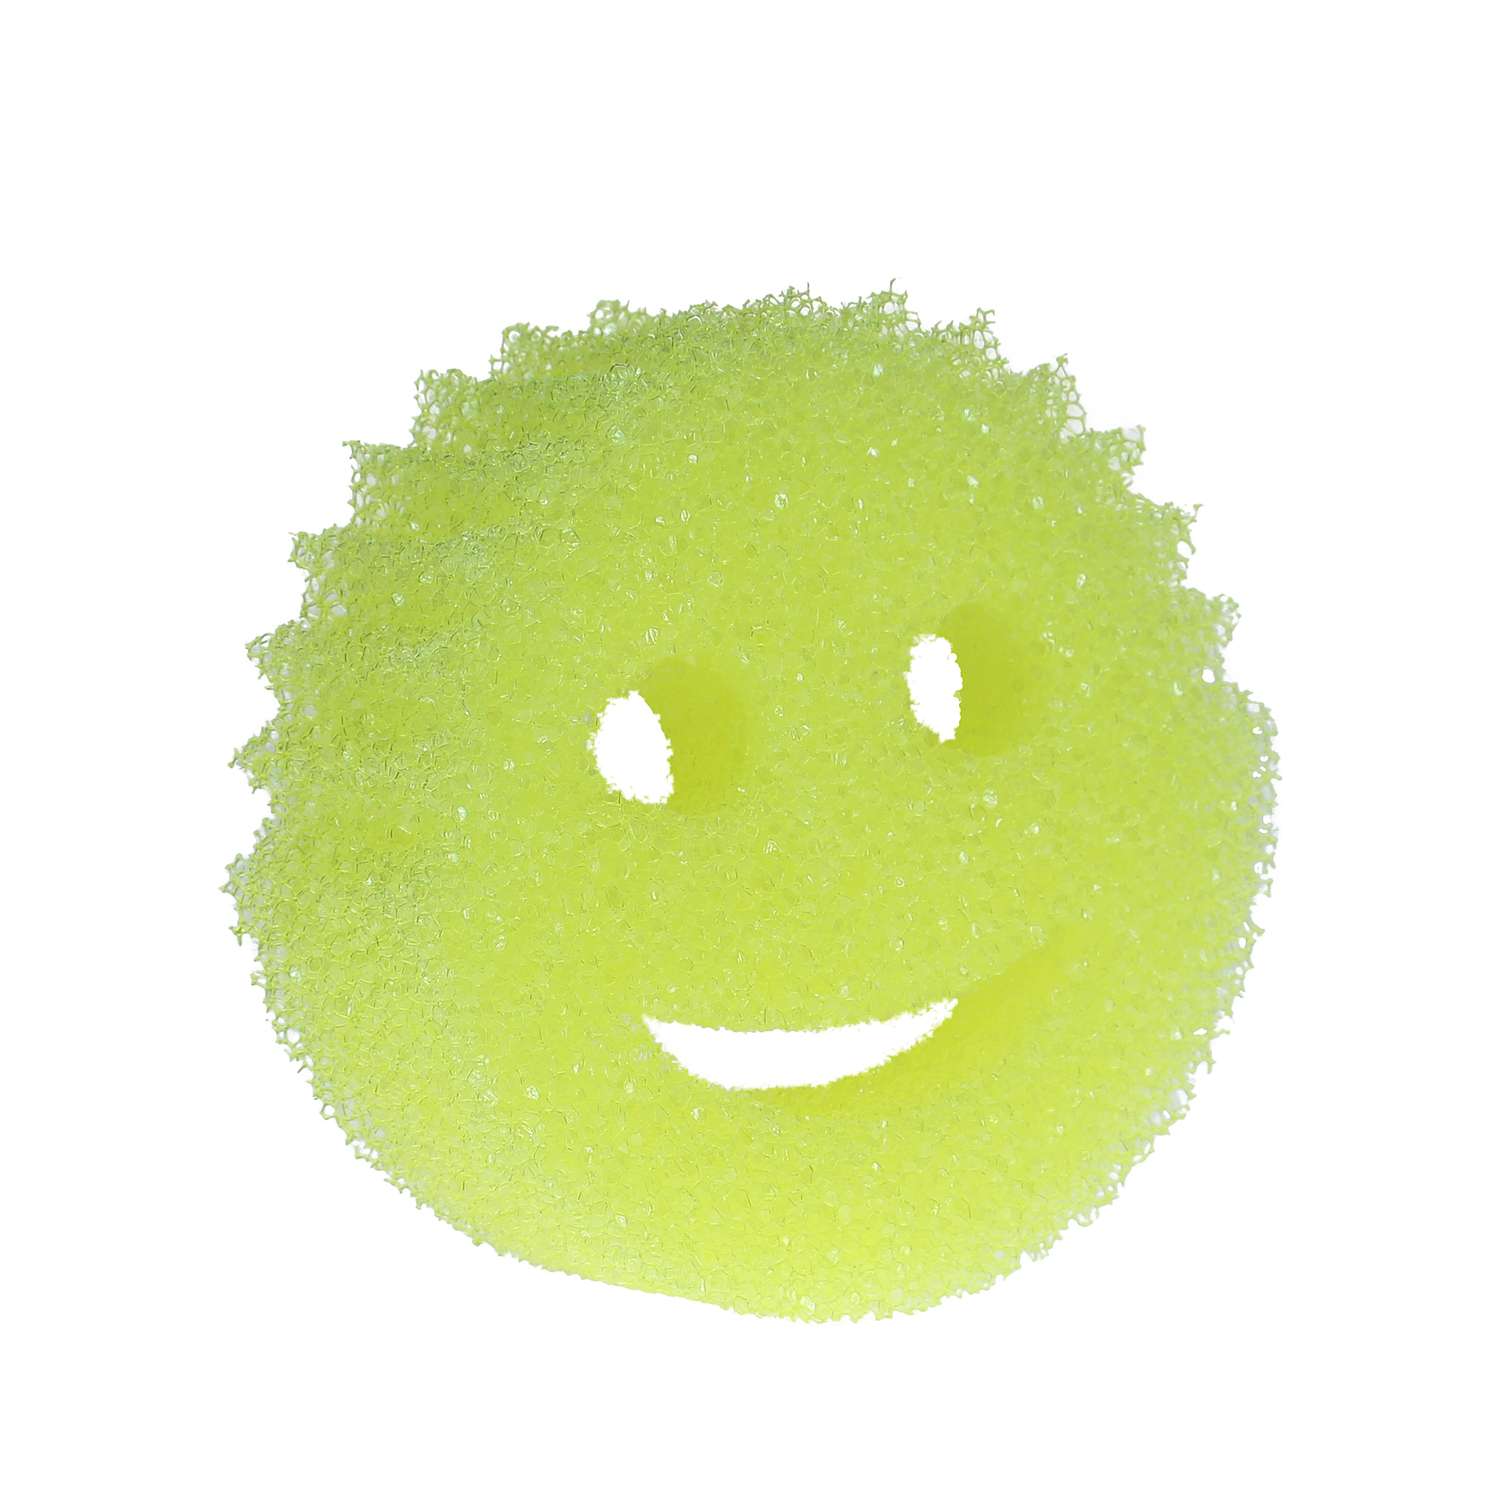 Have A Smiley Face Scrubber? Need A Smiley Face Sponge Holder For It?  Here's My Review Of The Scrub Daddy Caddy AND The Scrub Daddy Sponge Caddy